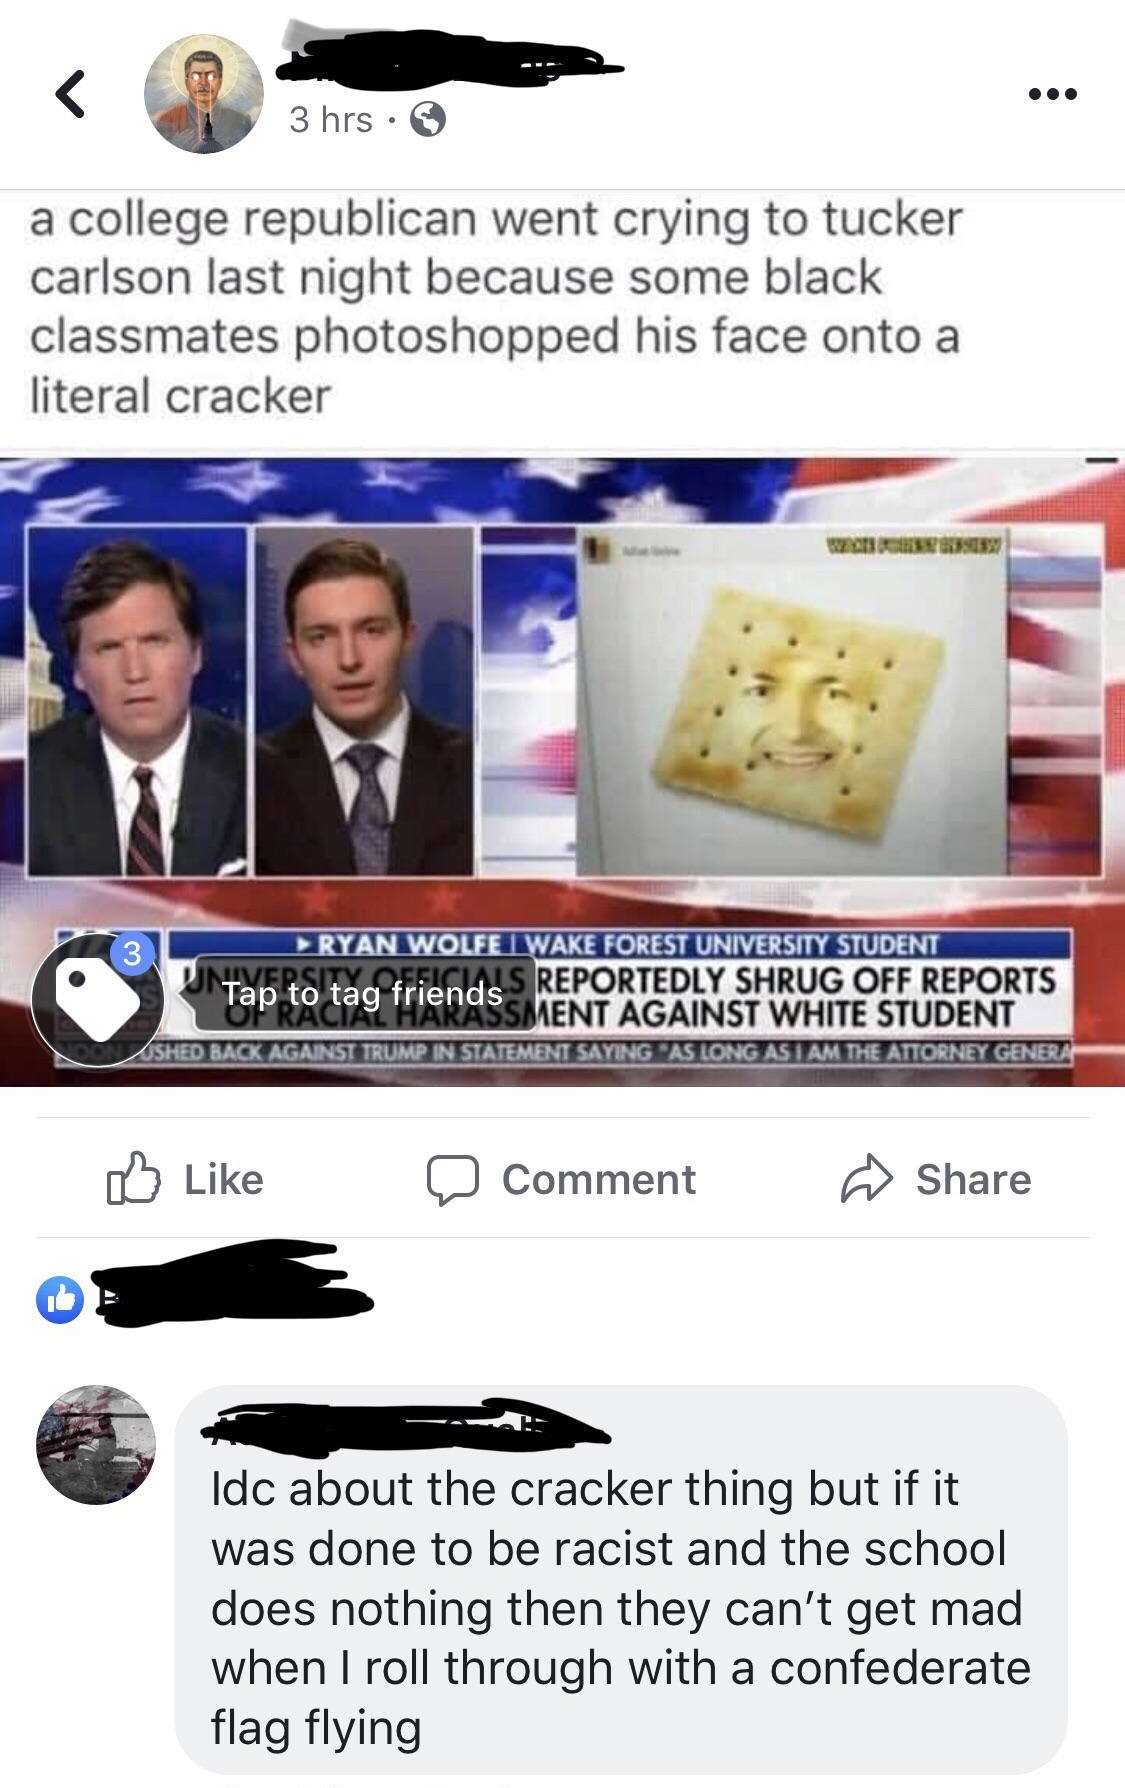 web page - 3 hrs a college republican went crying to tucker carlson last night because some black classmates photoshopped his face onto a literal cracker Unive Ryan Wolfe I Wake Forest University Student Tap to tag friends A.S Reportedly Shrug Off Reports